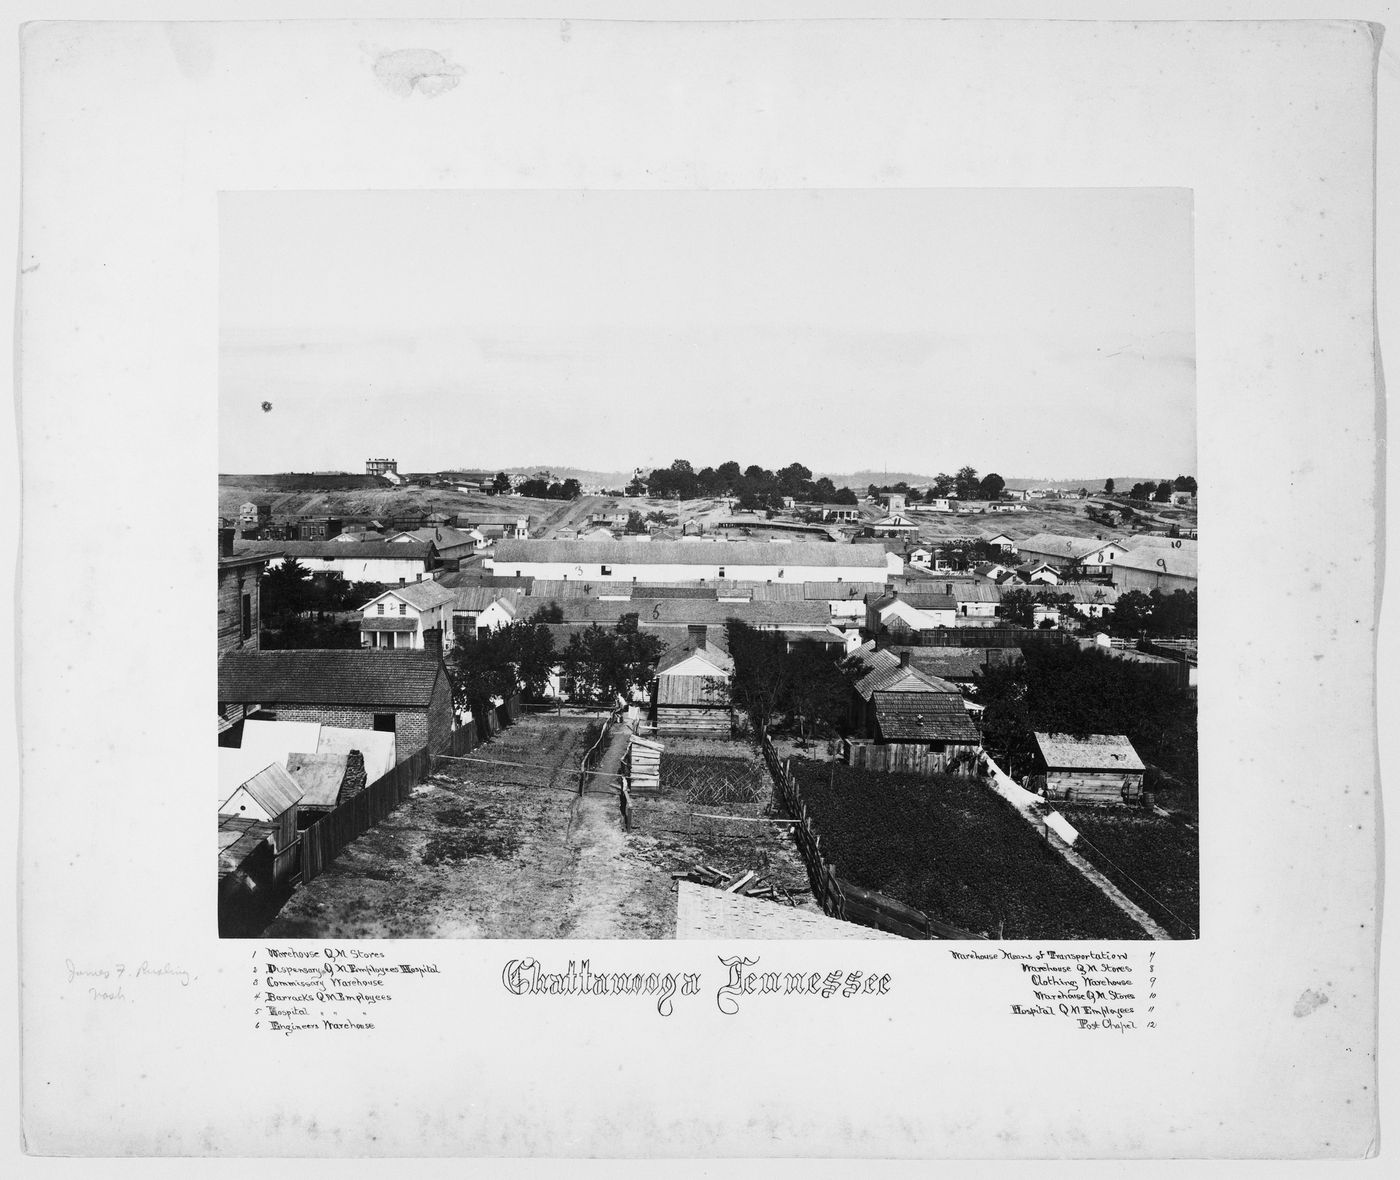 View of quartermaster's camp with warehouses, barracks, etc., Chattanooga, Tennessee